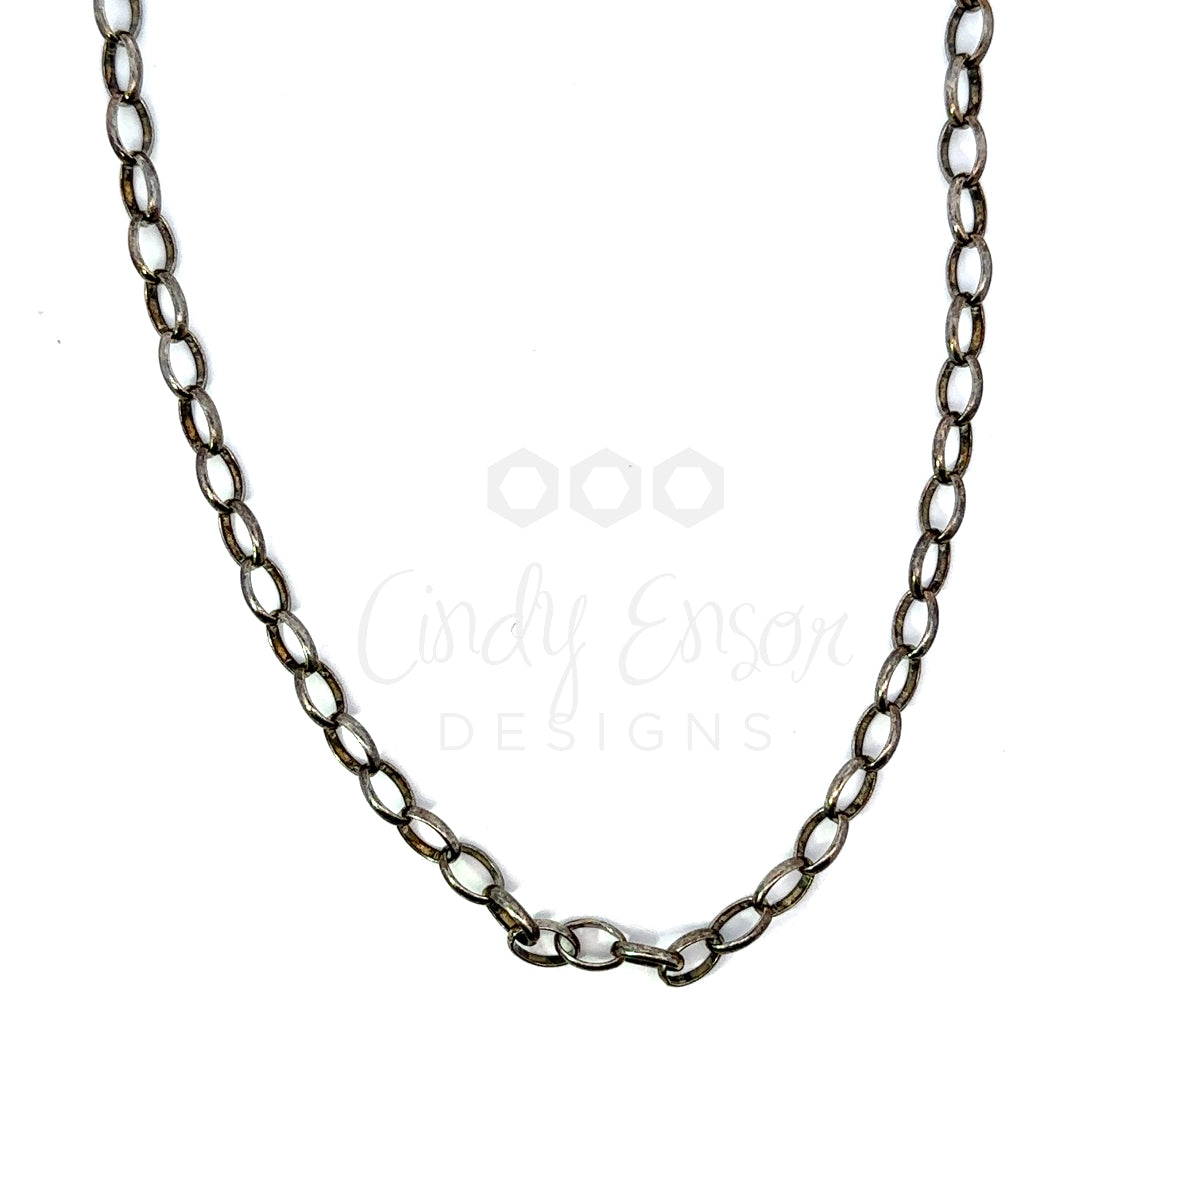 15” Sterling Silver Oval Chain